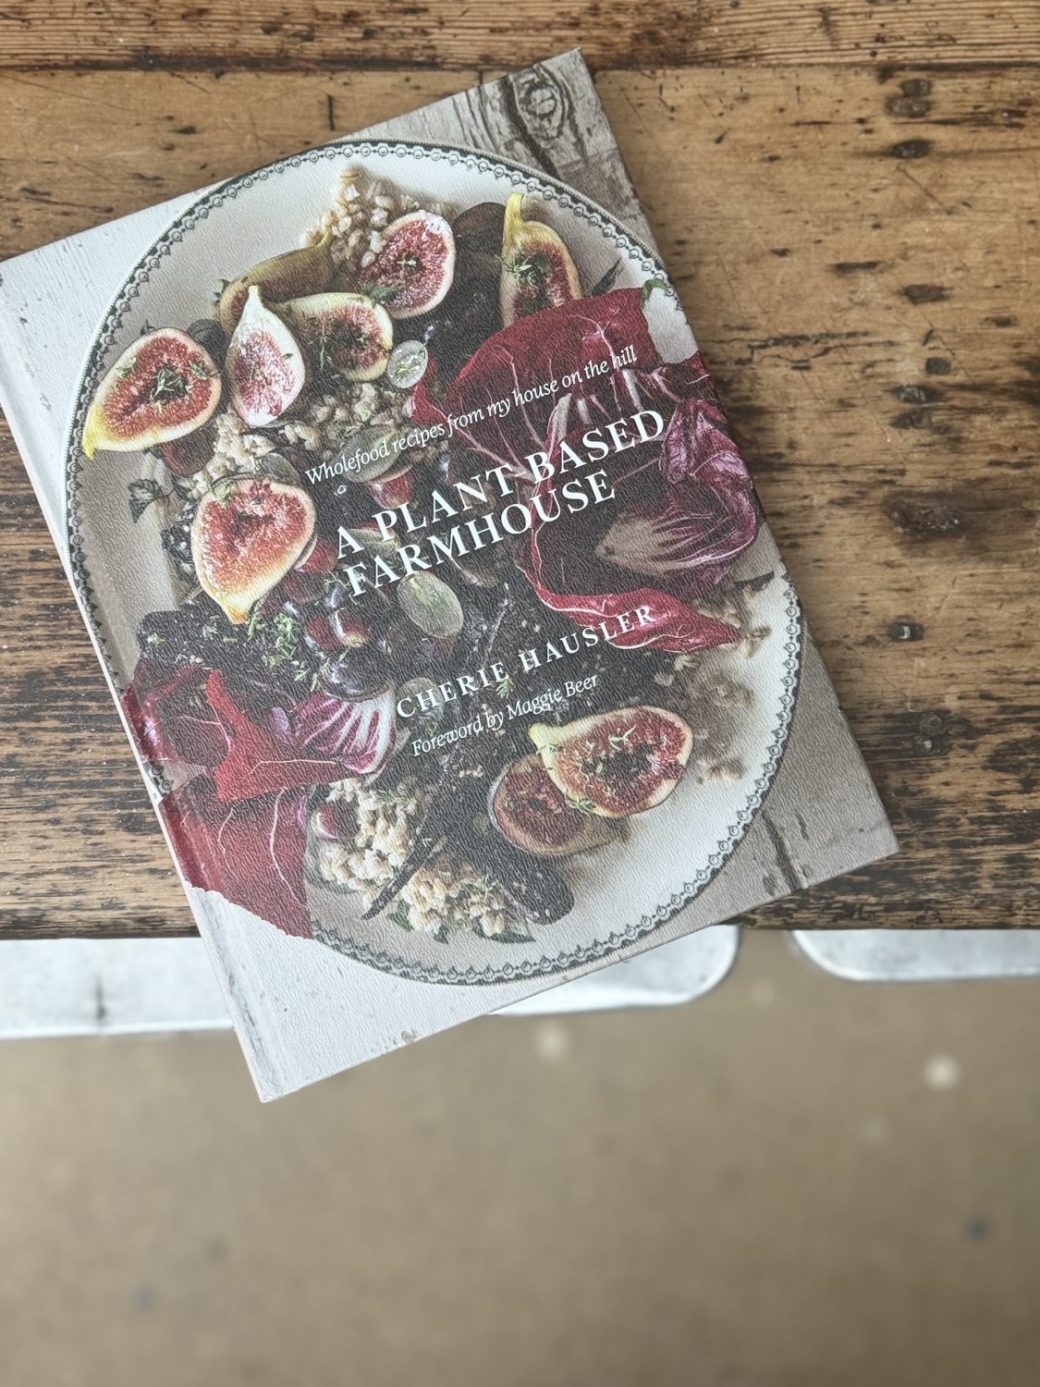 A Plant based Farmhouse book on the table at The Sourdough School